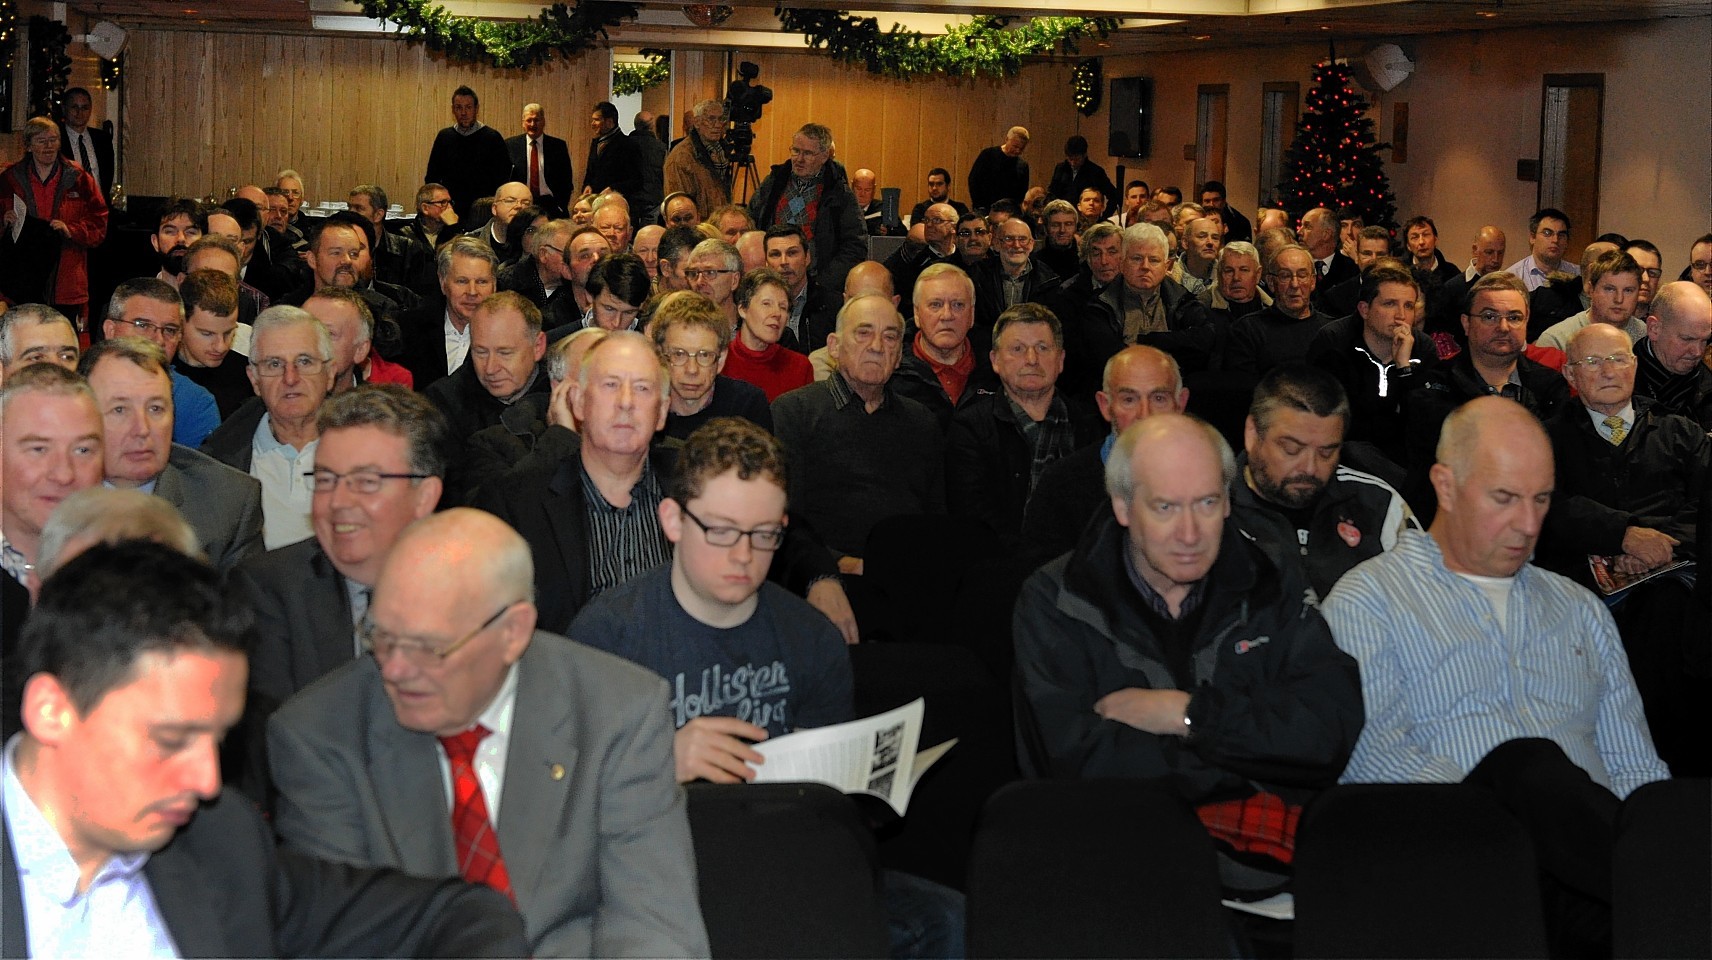 The Dons shareholders turned out in good numbers